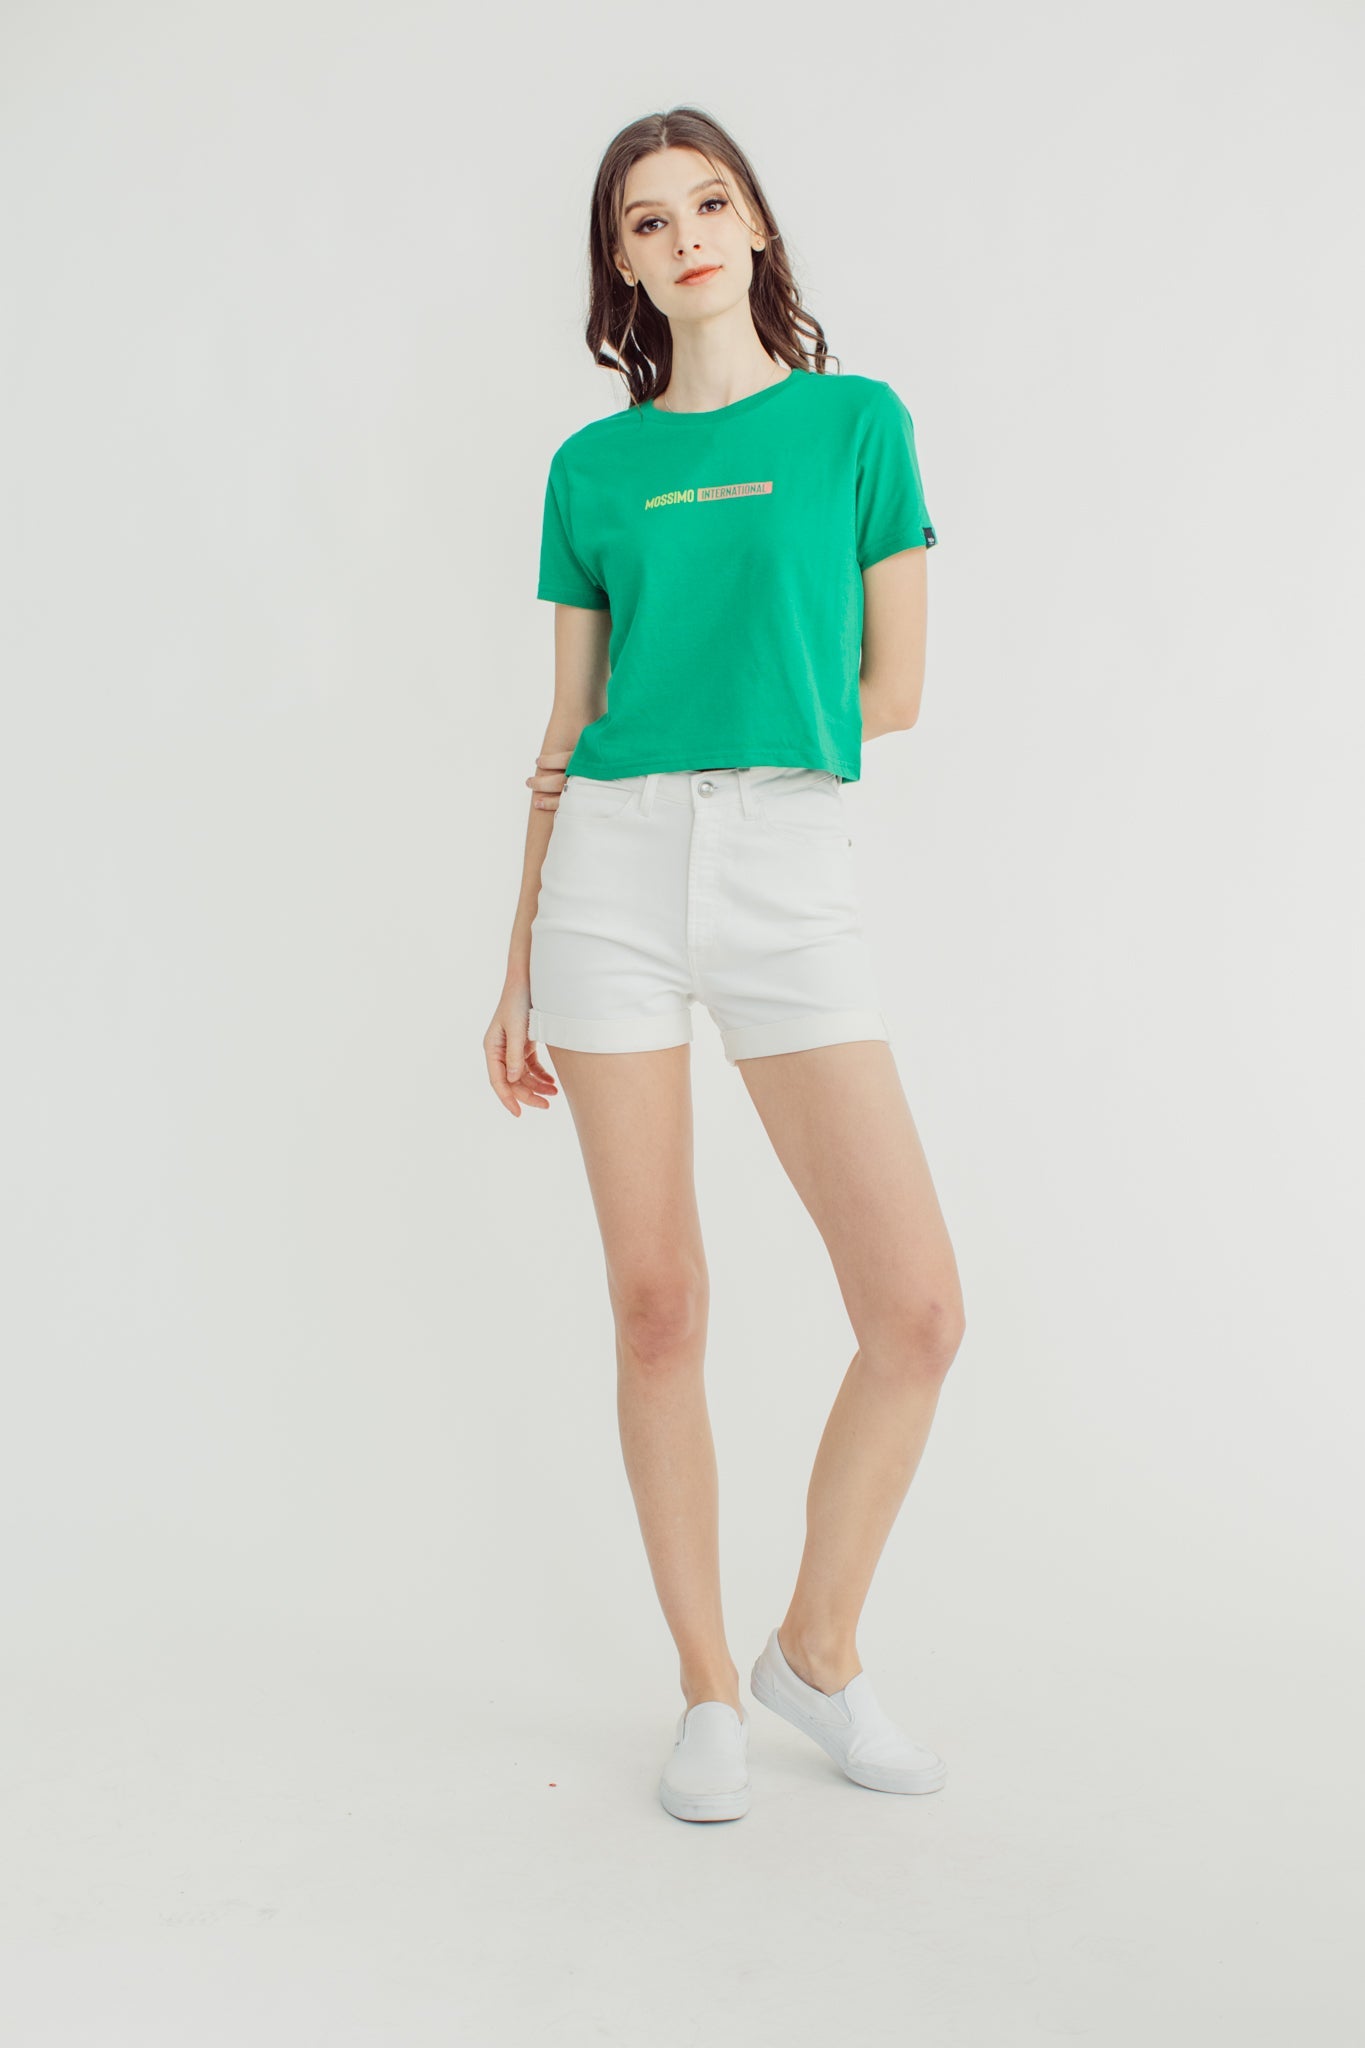 Jelly Bean with Mossimo California Gradient Classic Cropped Fit Tee - Mossimo PH